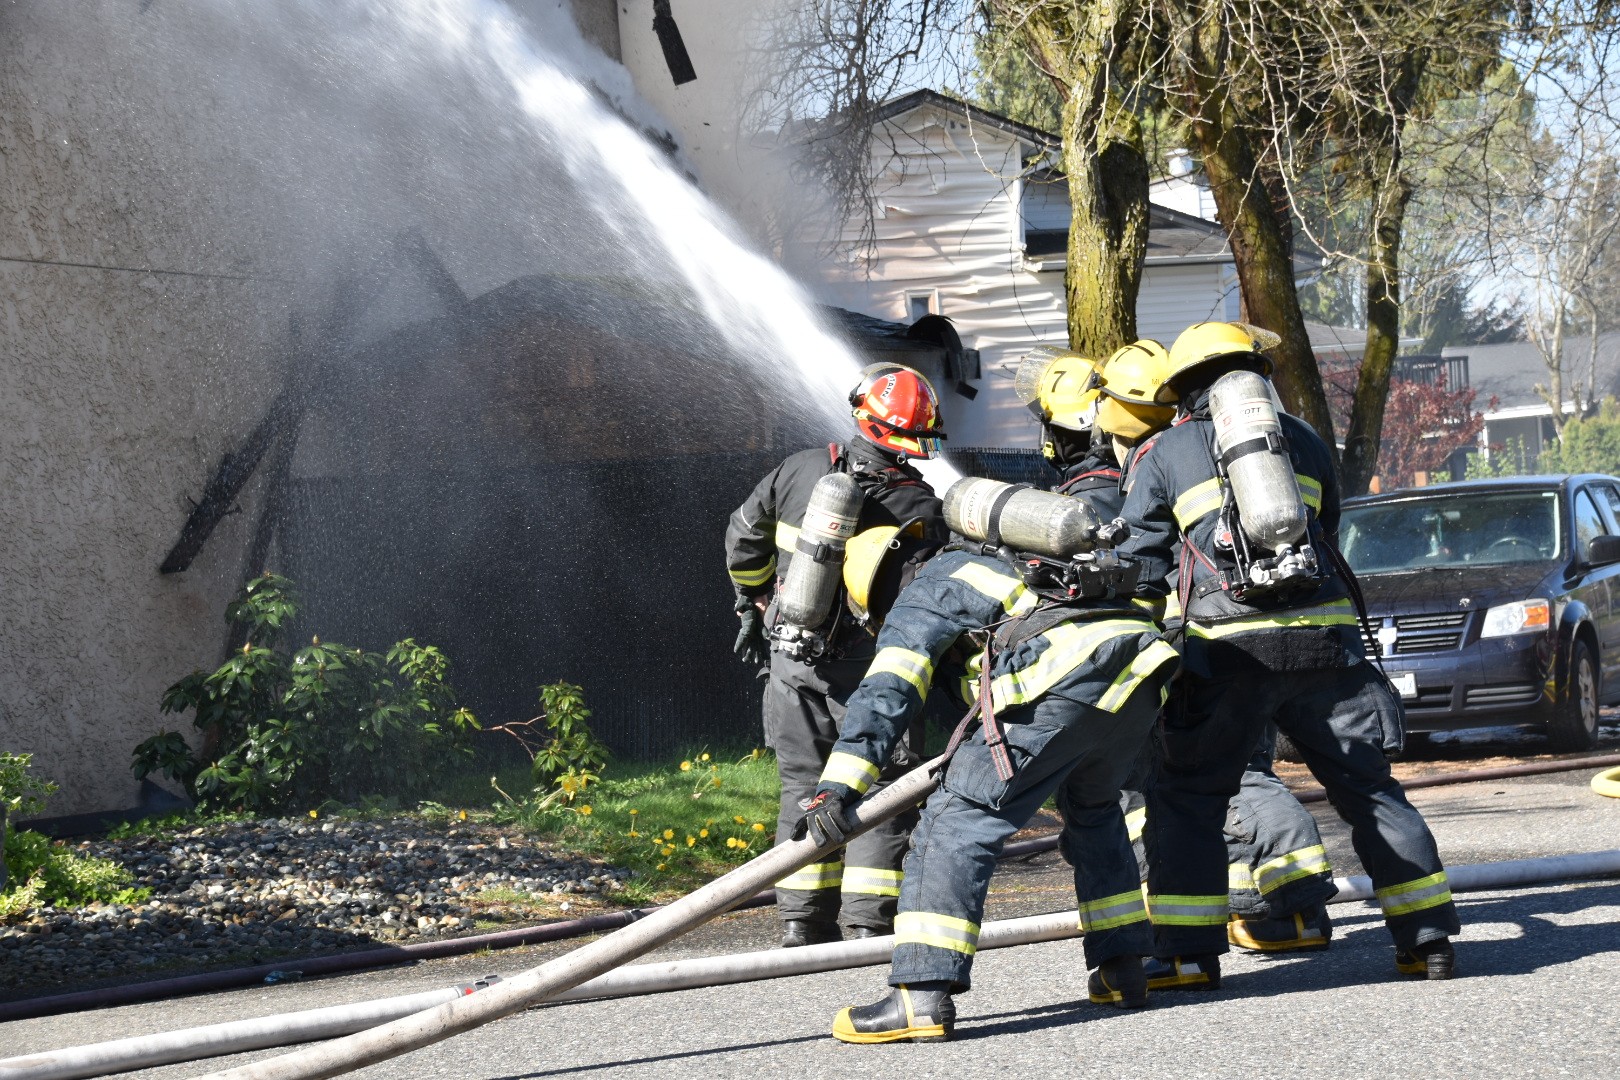 3 in hospital after multi&house fire in Aldergrove thumbnail